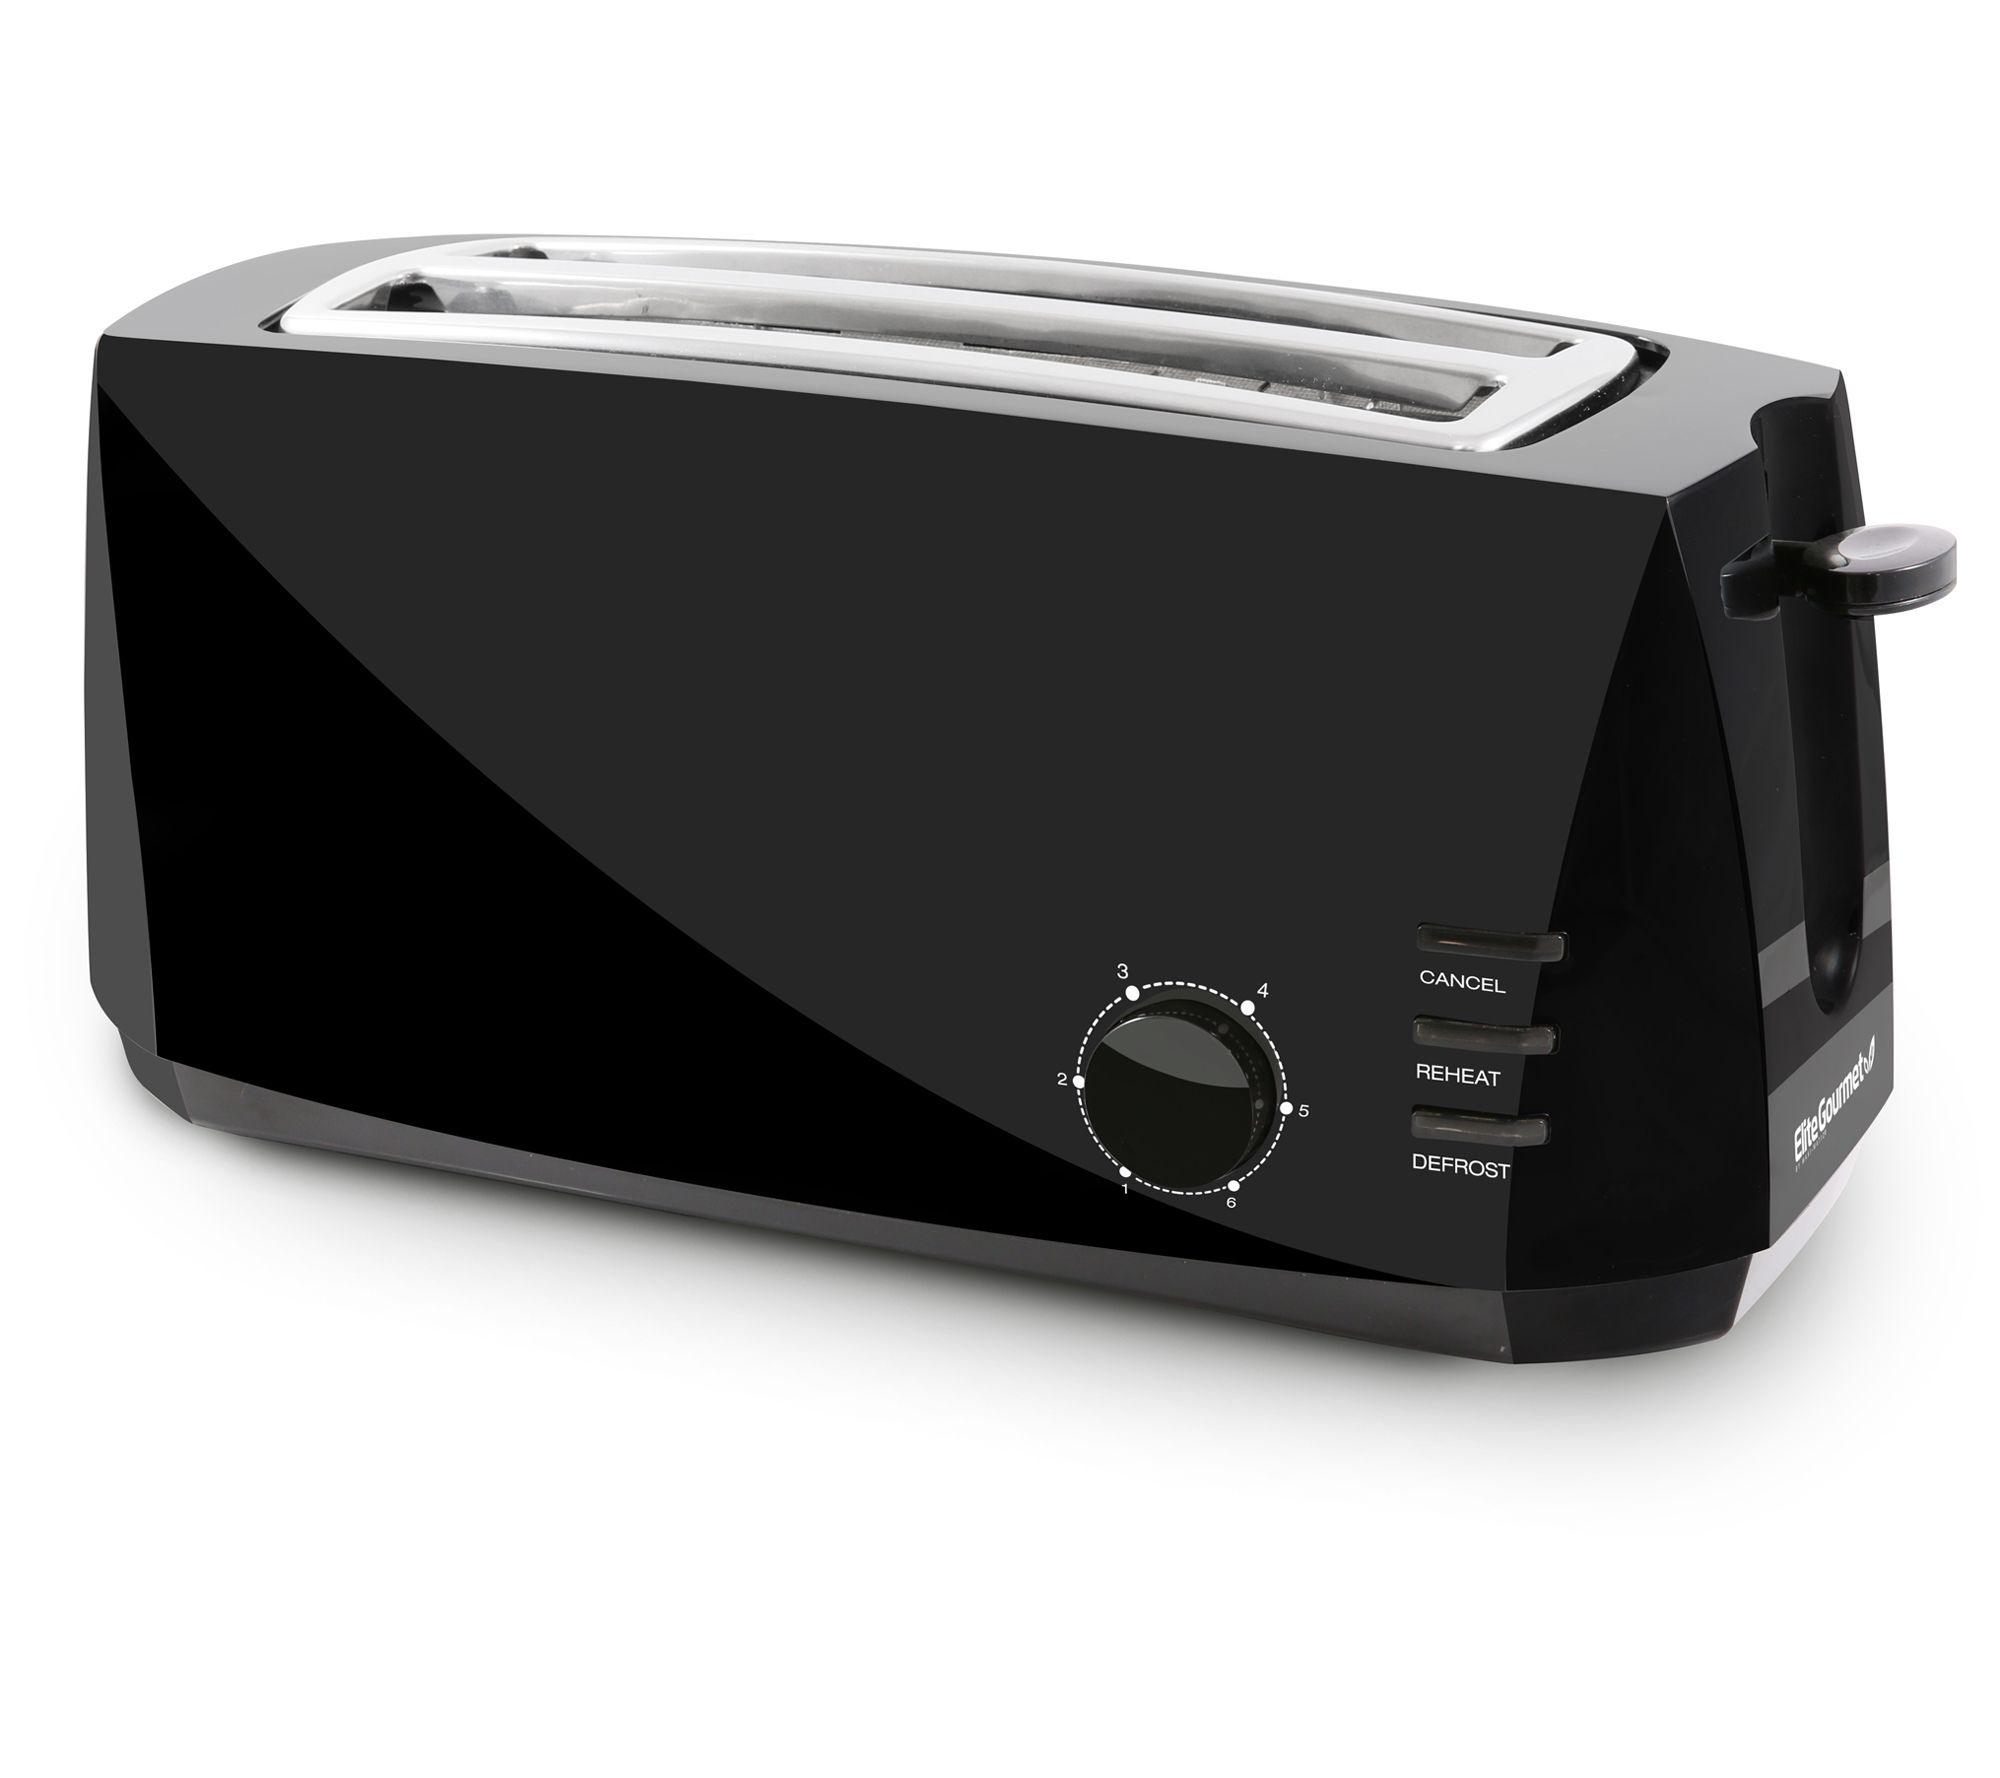 Elite Cuisine 4 Slice Cool-Touch Long Toaster [ECT-4829]